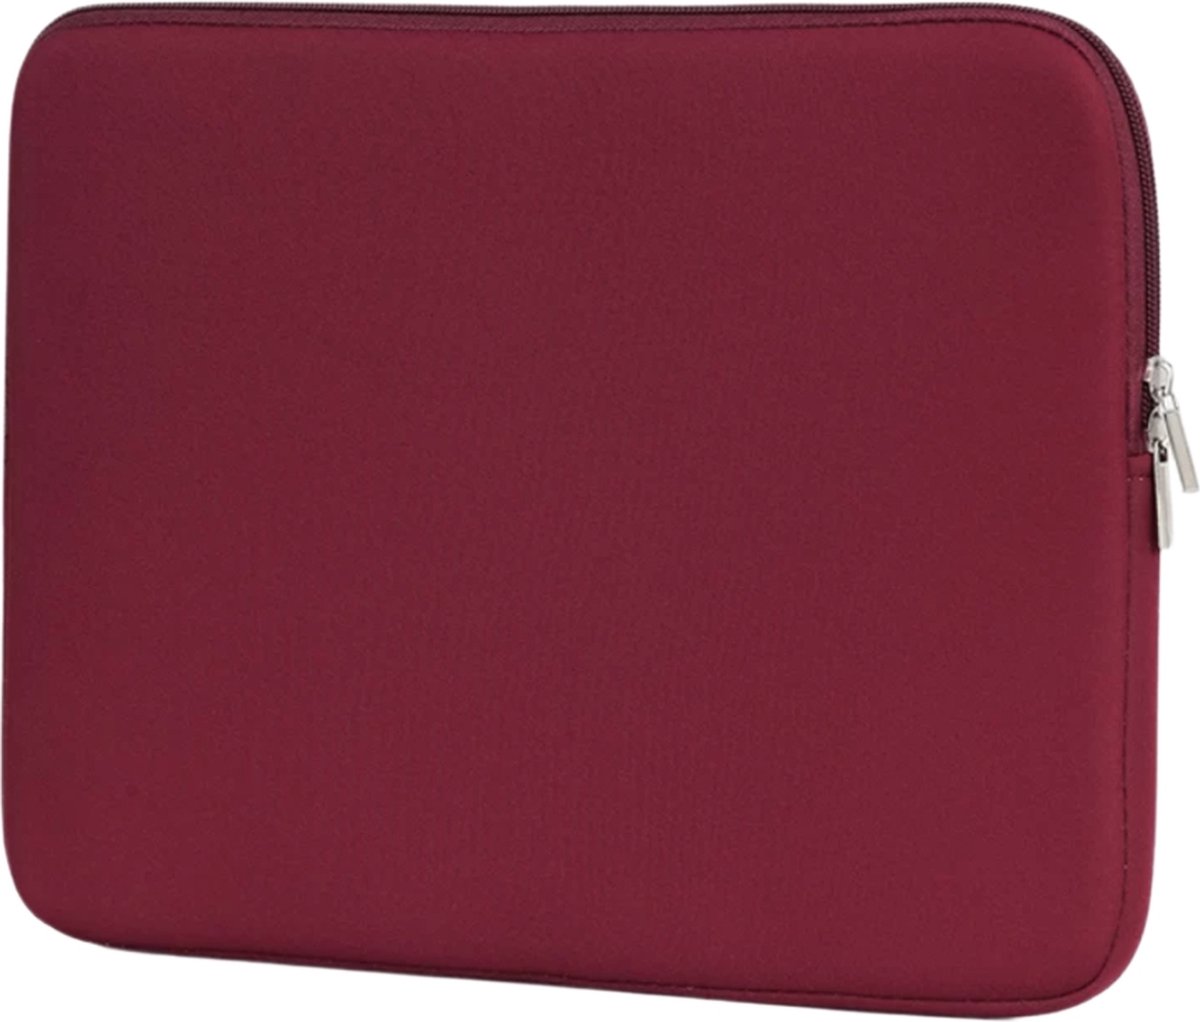 15,6 inch – laptopsleeve – soft touch – bordeaux rood- Ultra Licht-Notebook Tas - Dubbele Ritssluiting